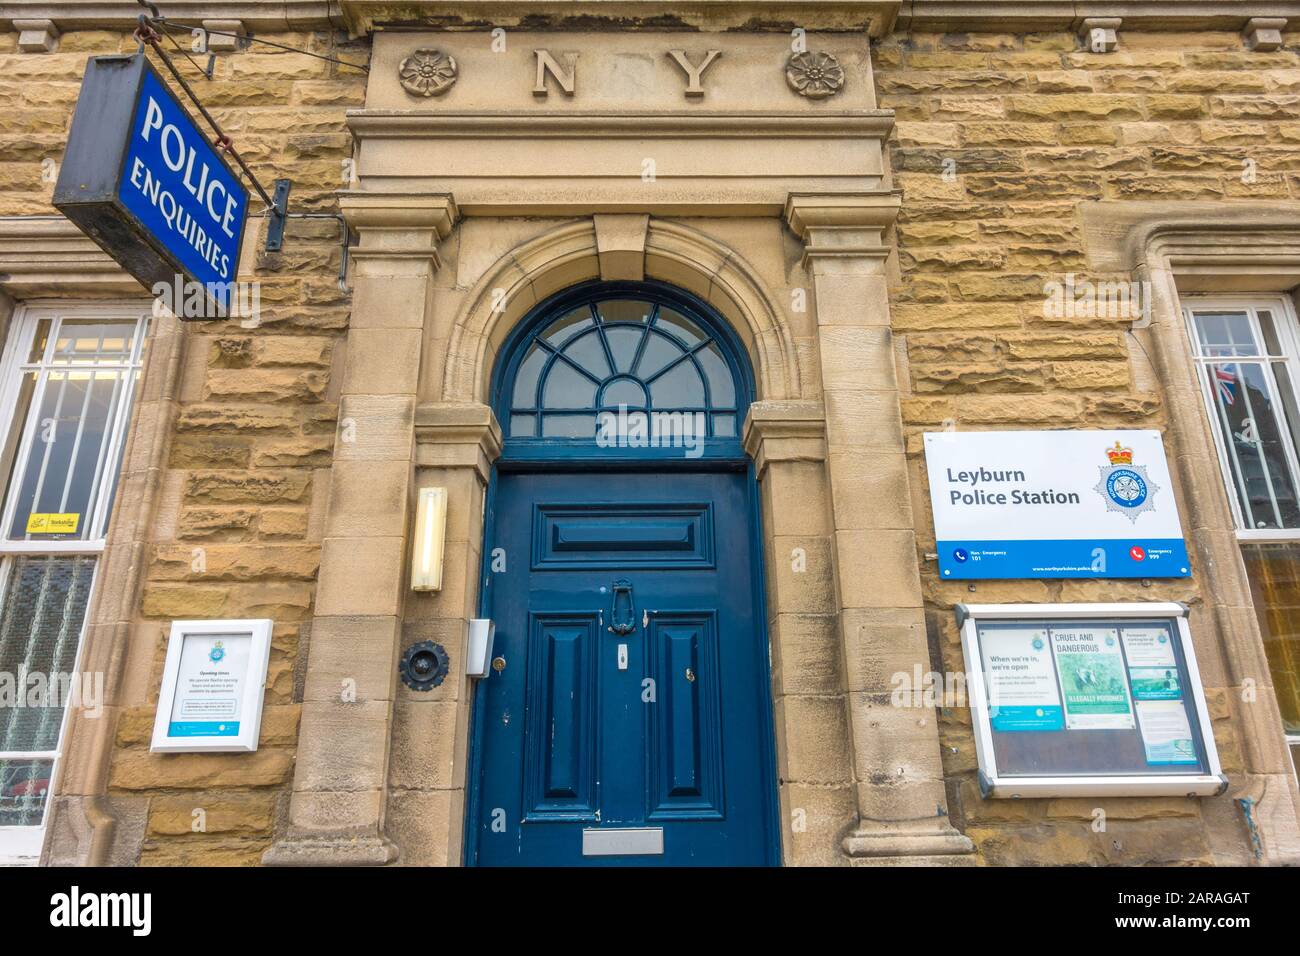 The outside of a police station, located in a period stone building in the market town of Leyburn, Richmondshire, North Yorkshire, England, UK. Stock Photo